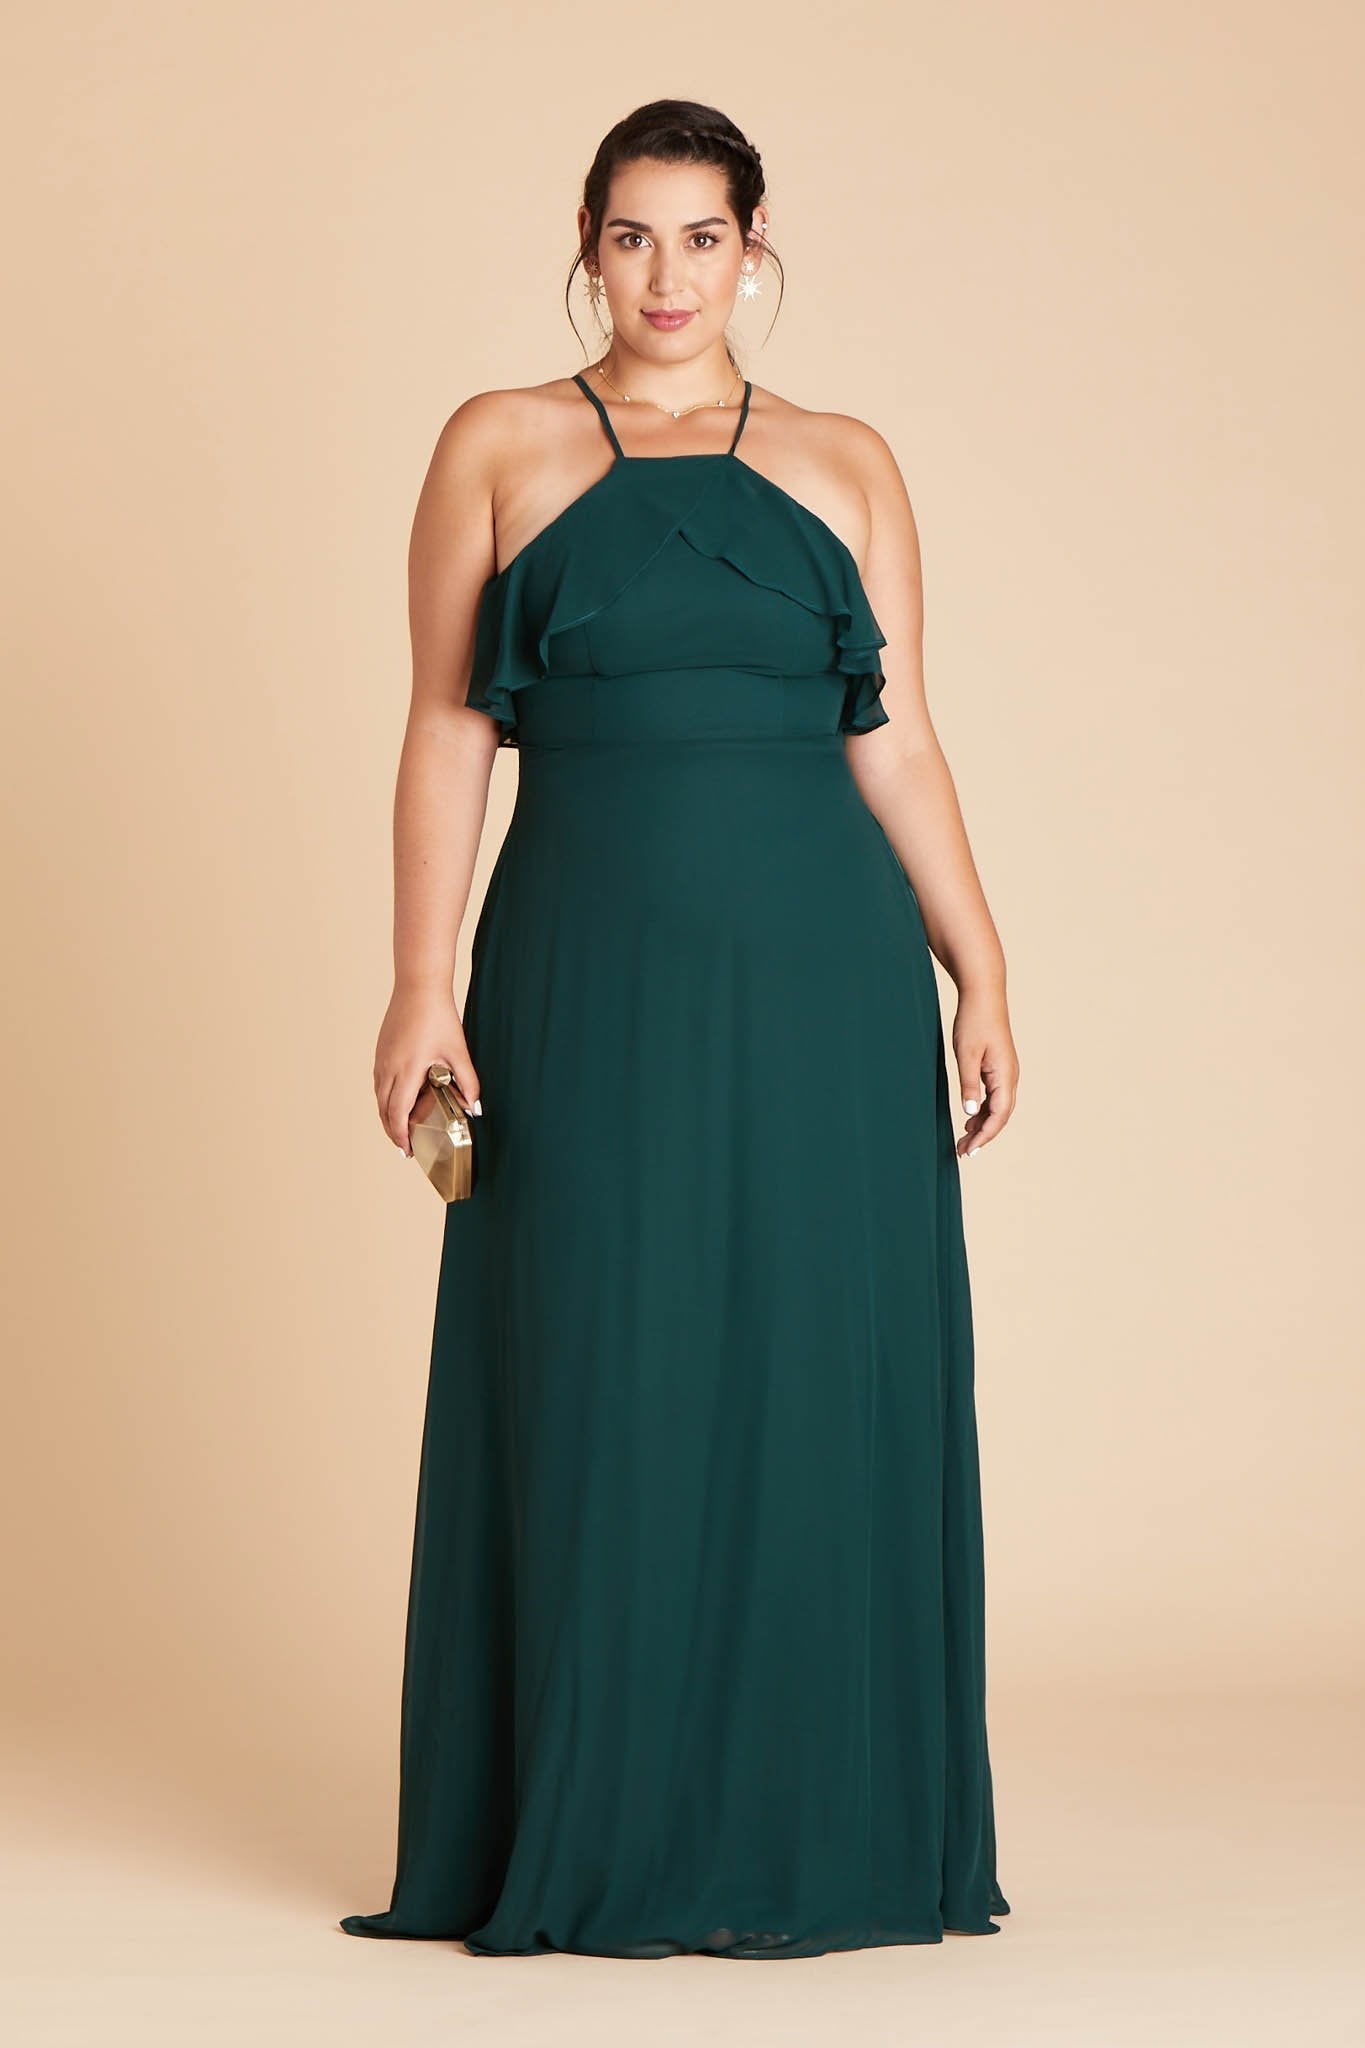 Emerald green with a pop of colour! - House of Bellator